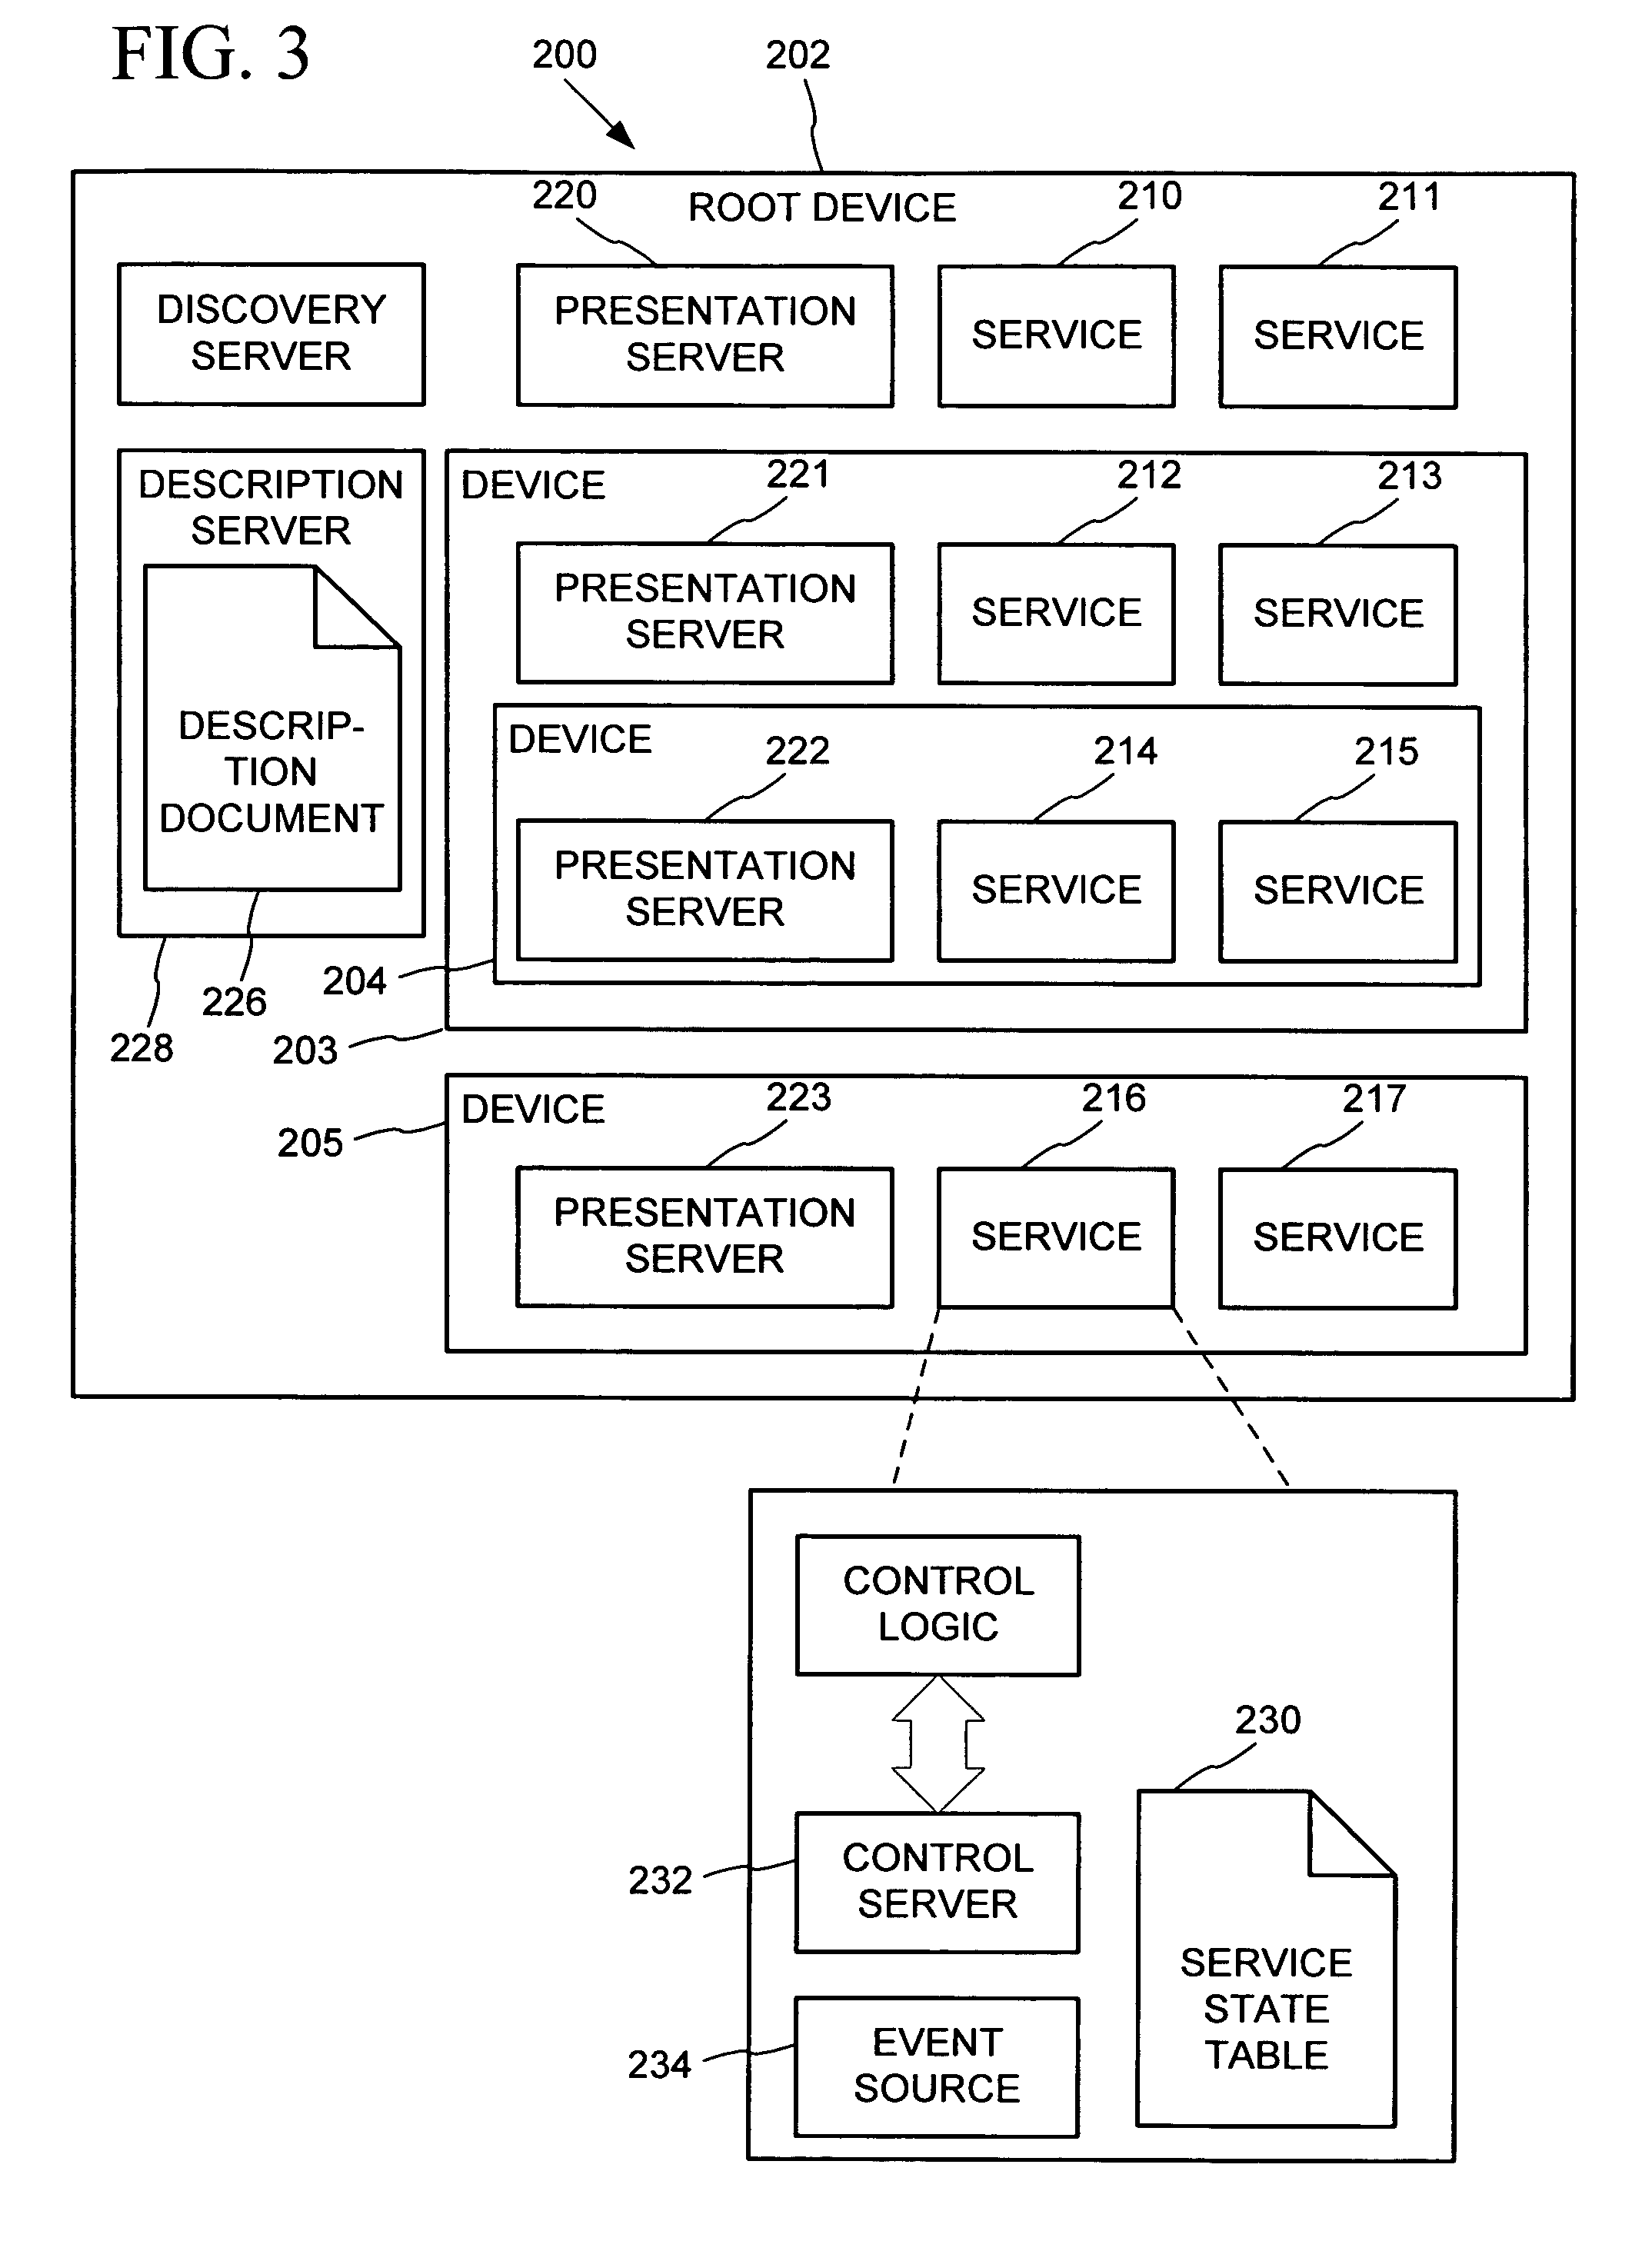 Data driven remote device control model with general programming interface-to-network messaging adaptor